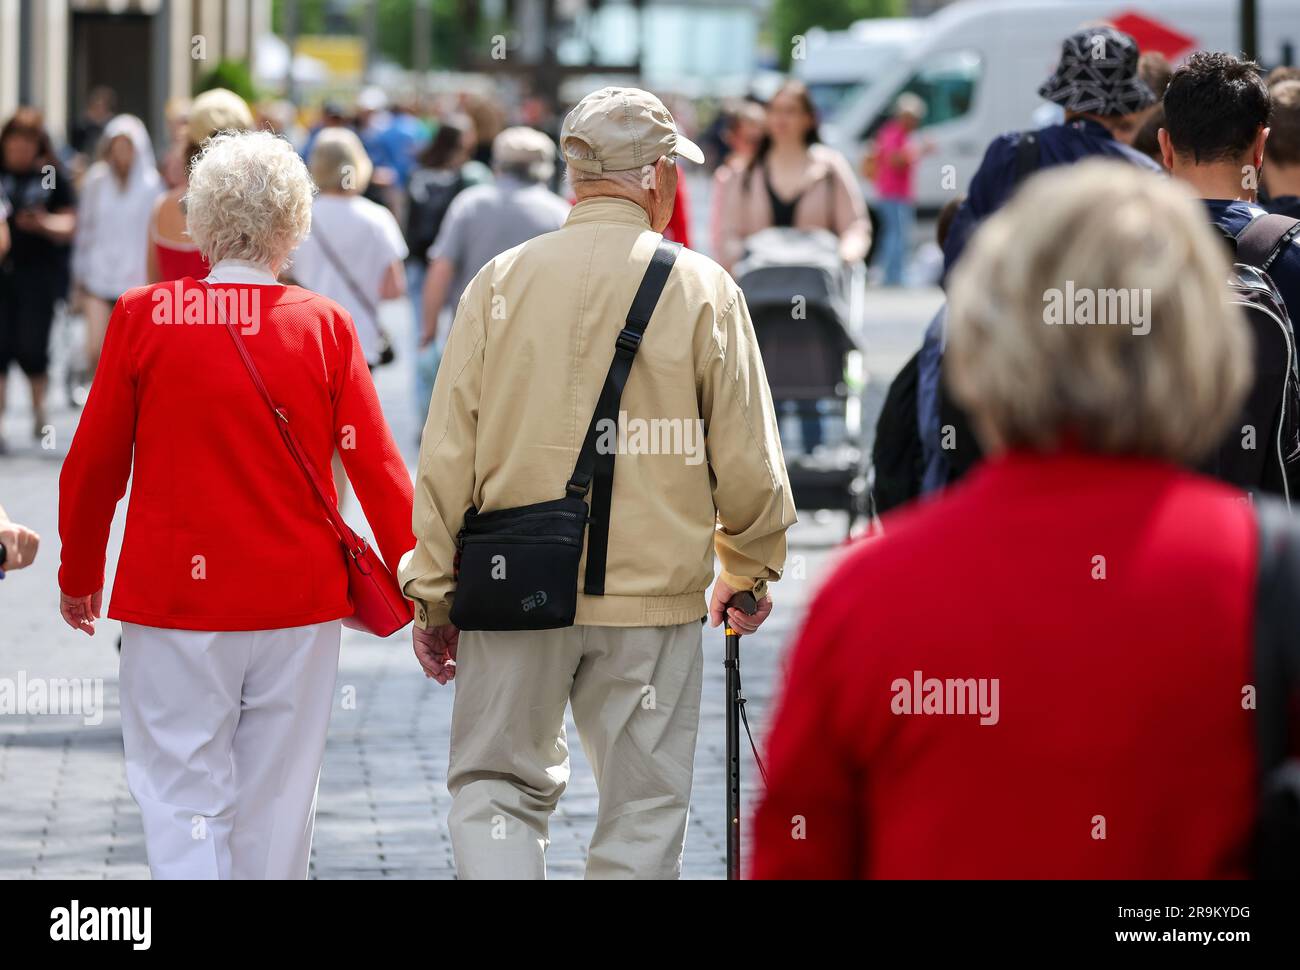 Leipzig, Germany. 27th June, 2023. Senior citizens go shopping through downtown Leipzig. The approximately 21 million pensioners in the country will receive more money starting in July. With the annual pension adjustment, old-age pensions will rise by 4.39 percent in the west and 5.86 percent in the east. In addition, almost 30 years after reunification, the so-called pension value in the east will be brought into line with that in the west - one year earlier than planned. Credit: Jan Woitas/dpa/Alamy Live News Stock Photo